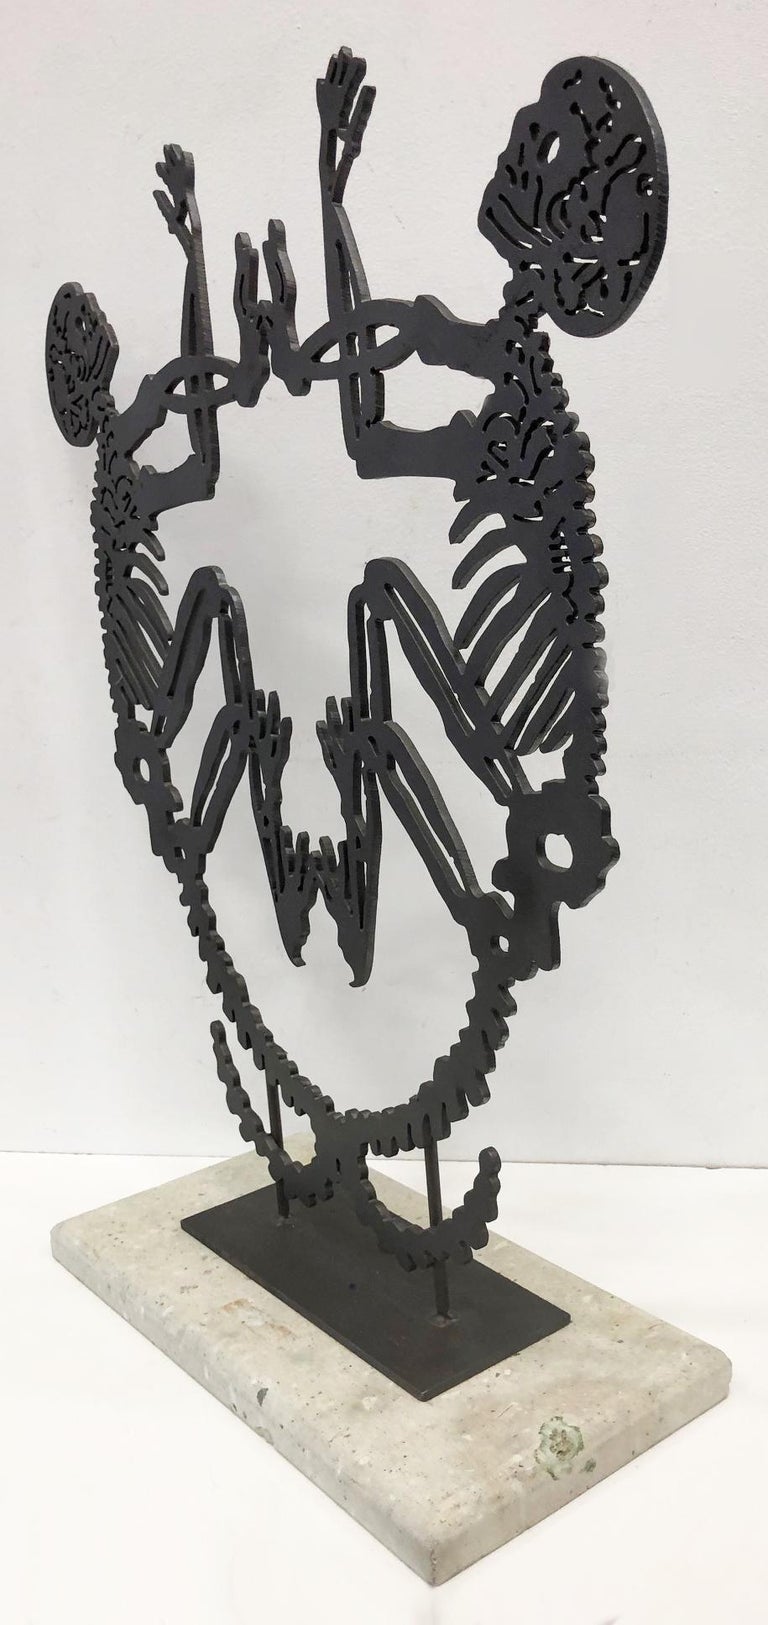 Large Abstract Metal Latin-American School sculpture with Skeletons

Offered for sale is a large abstract metal Latin-American School sculpture presented upon a stone base. The sculpture is substantial and creates a graphic impact.

 Measures: